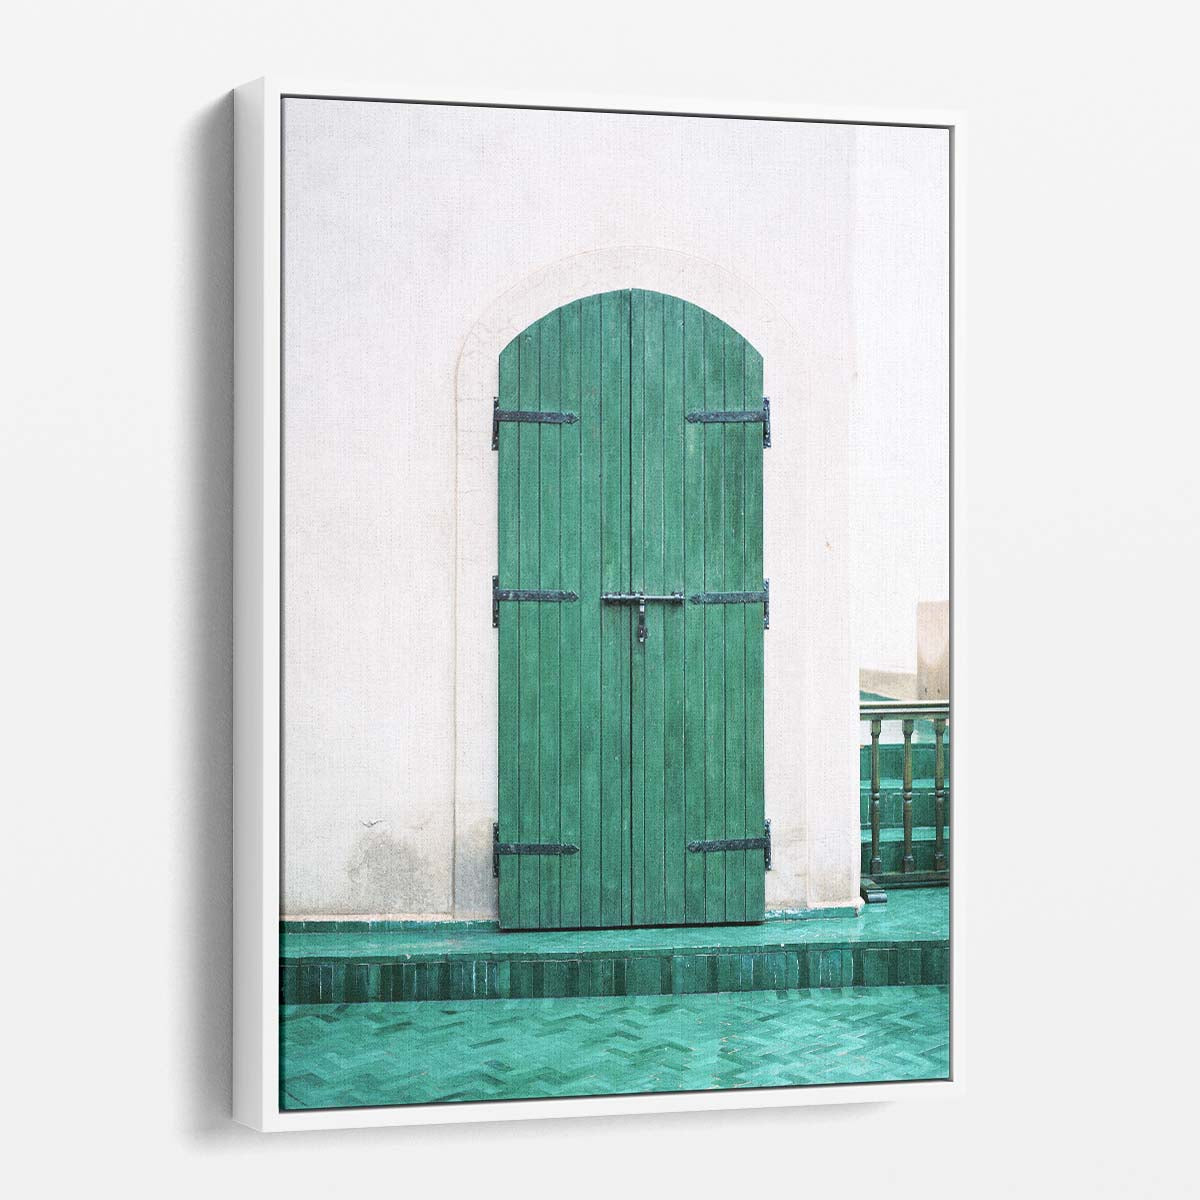 Colourful Marrakesh Doorway Photography - Moroccan Urban Architecture Wall Art by Luxuriance Designs, made in USA